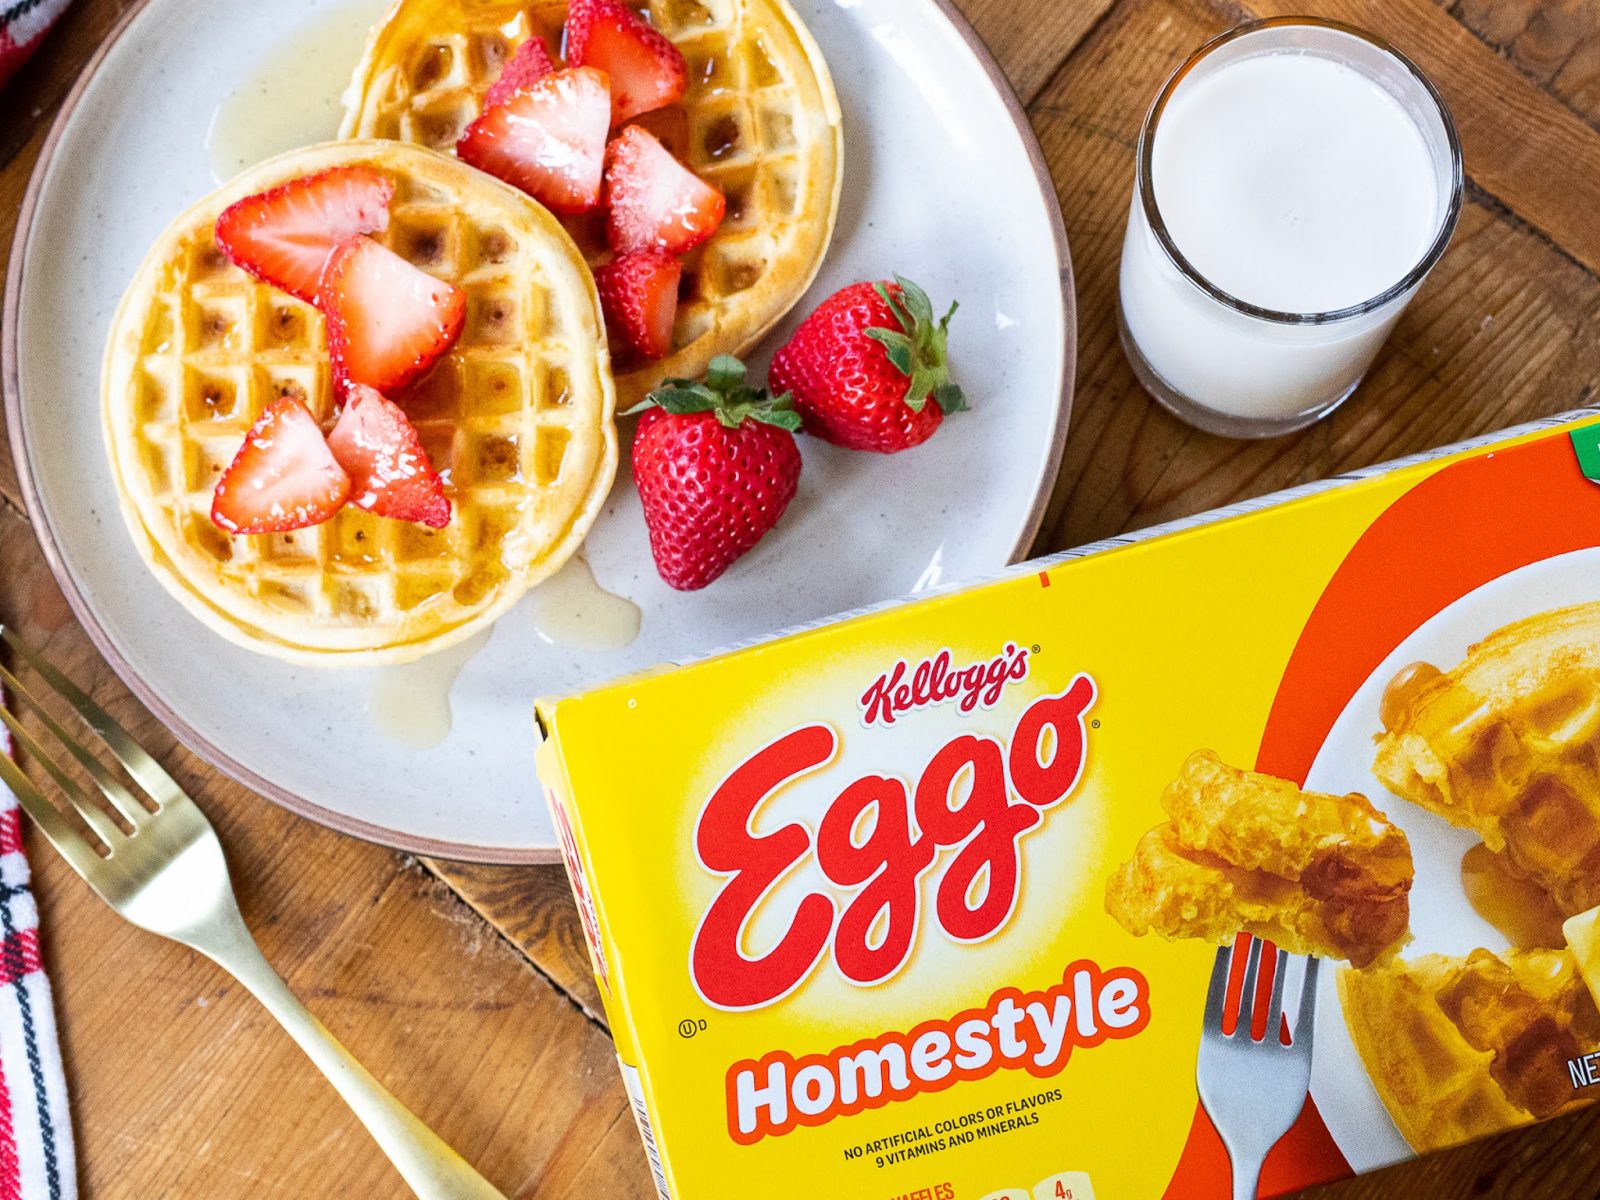 Get The Boxes Of Kellogg’s Eggo Waffles For Just $2.79 At Kroger